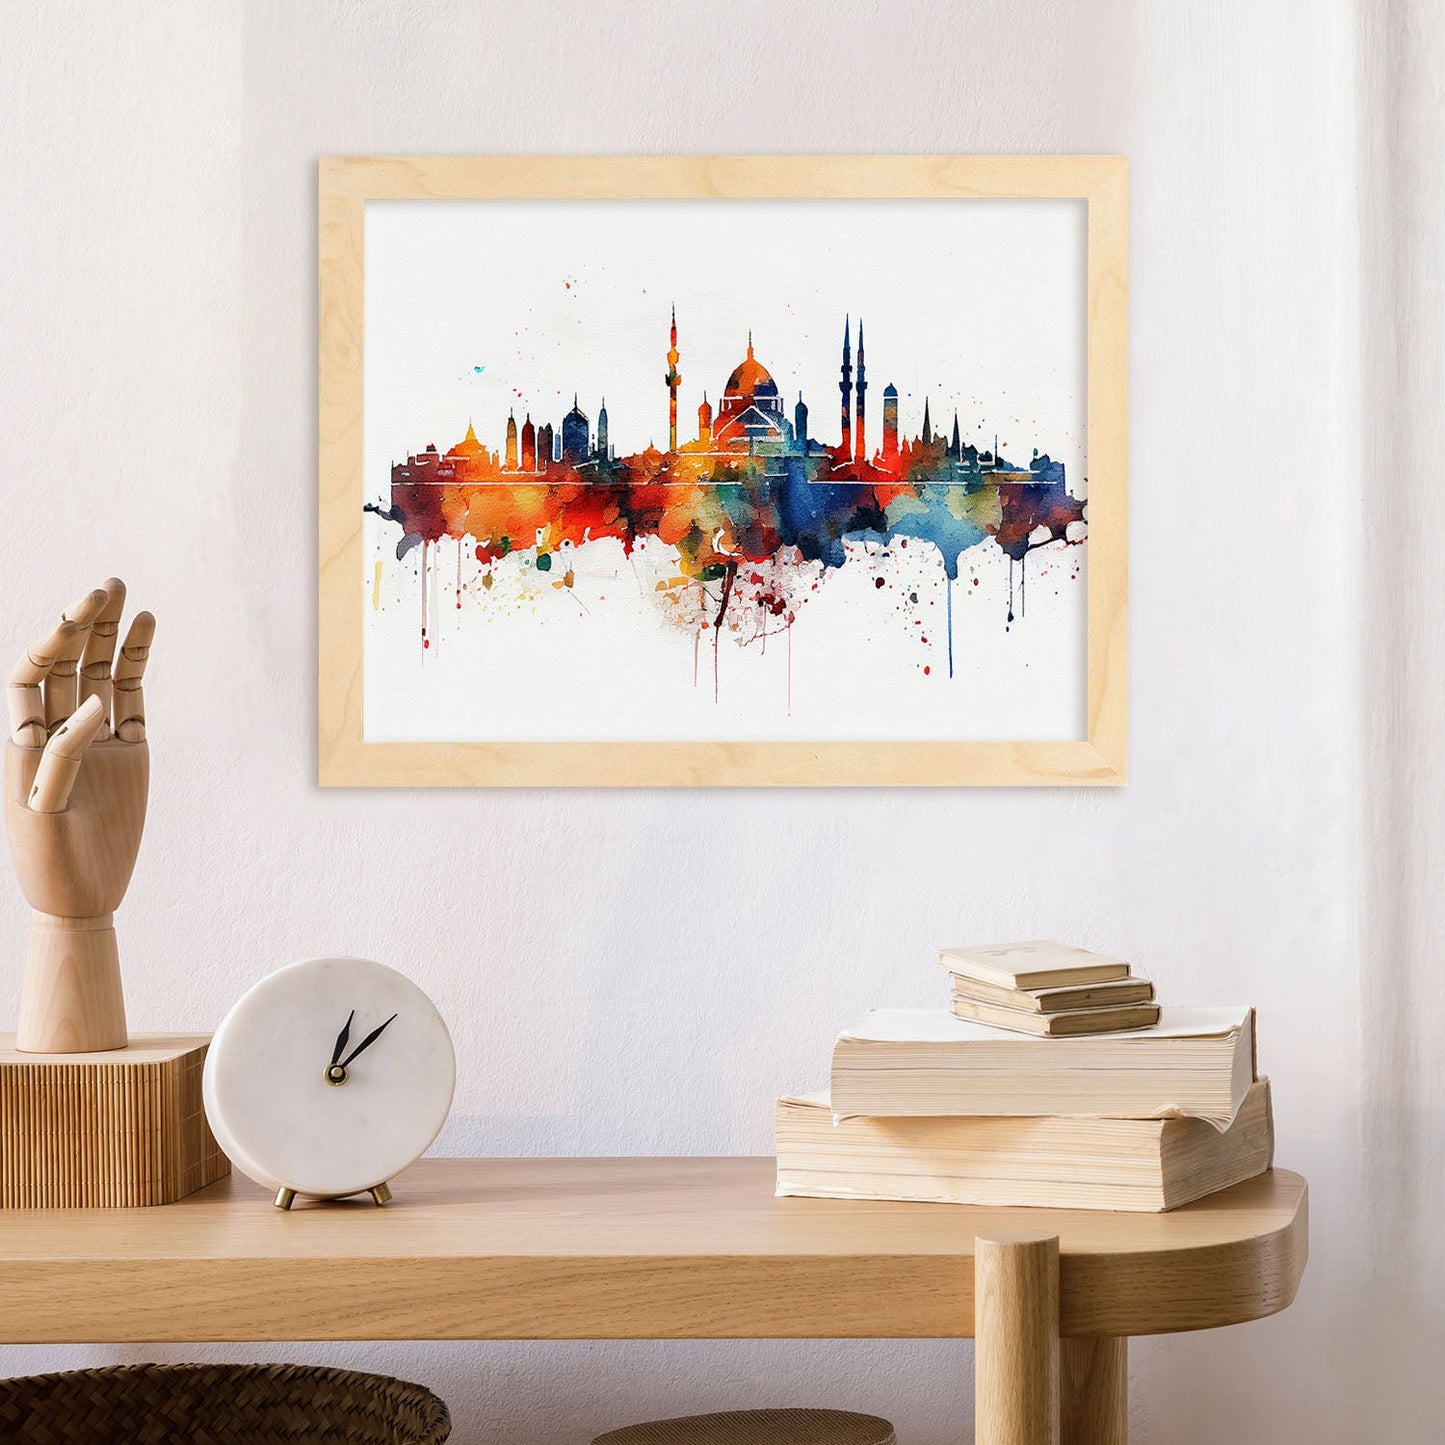 Nacnic watercolor of a skyline of the city of Istanbul_3. Aesthetic Wall Art Prints for Bedroom or Living Room Design.